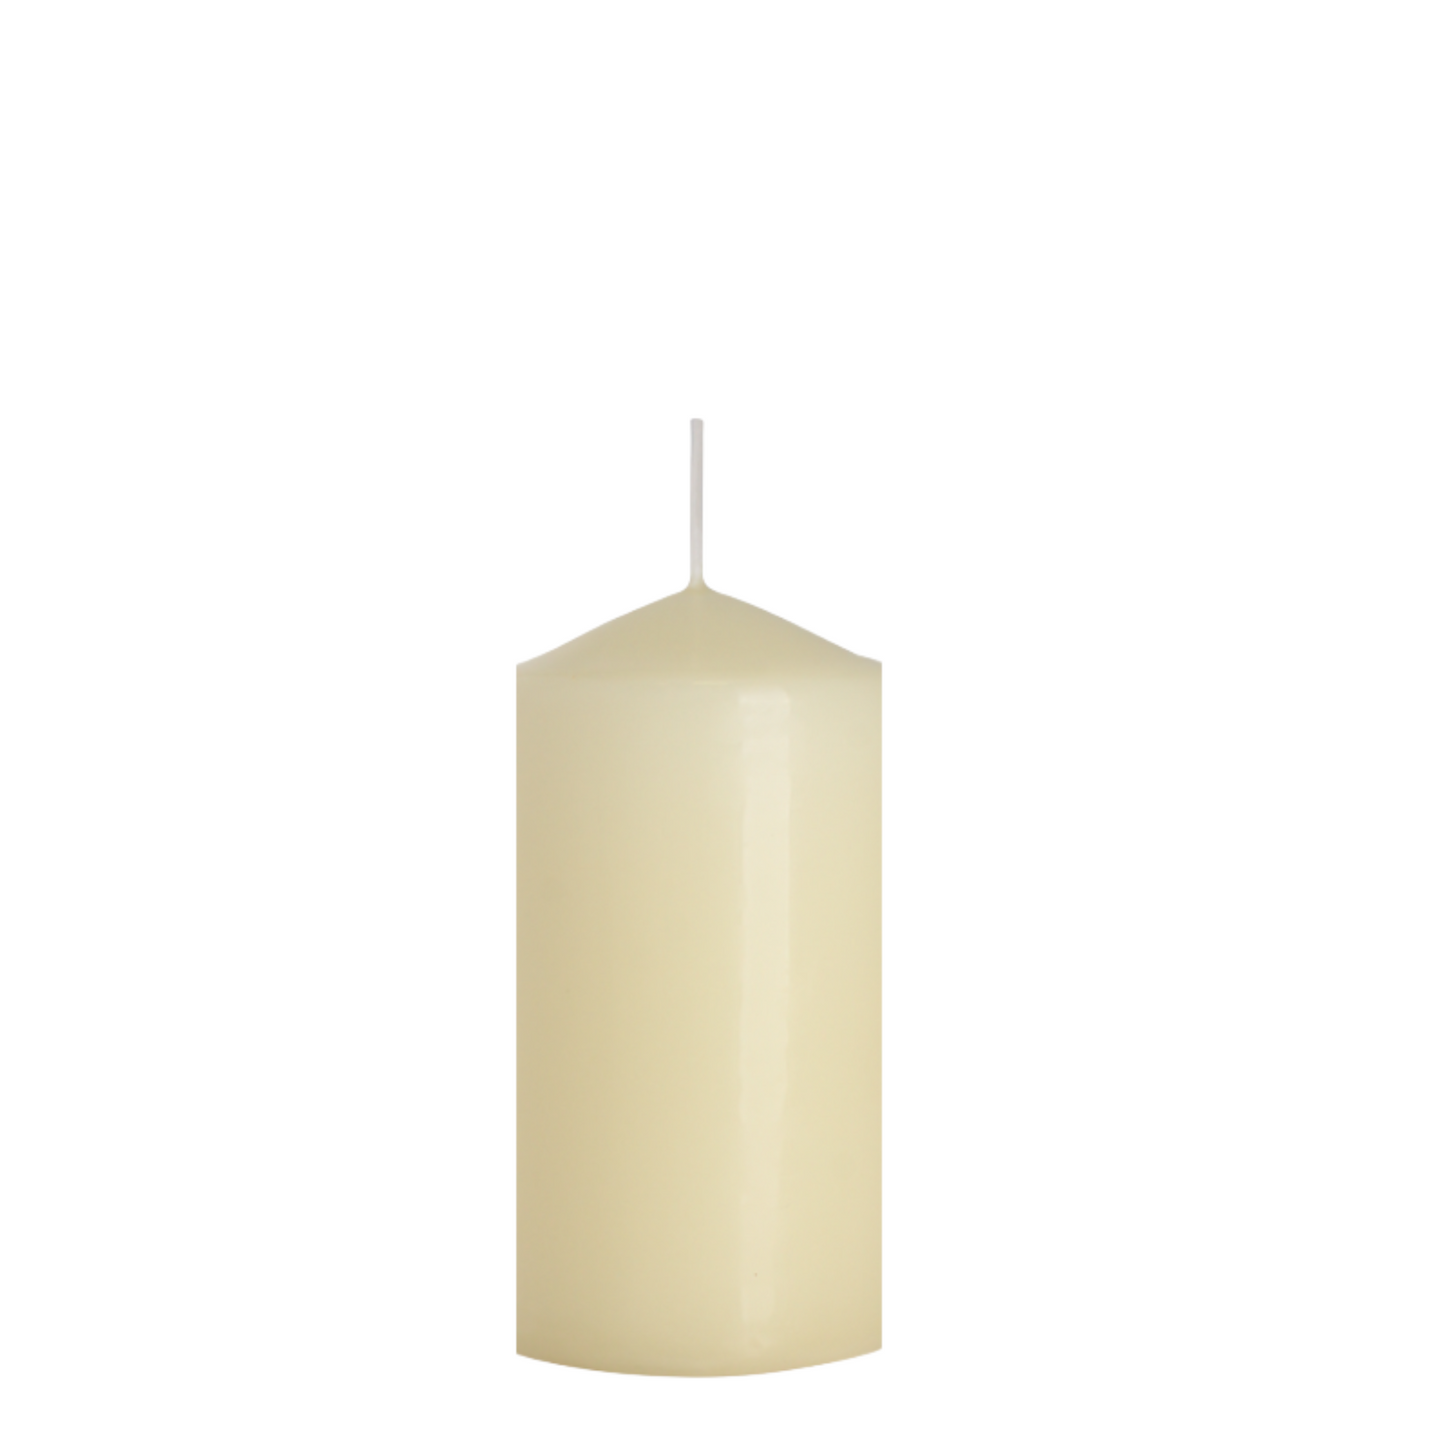 Cylindrical candle 10 x 6 cm.